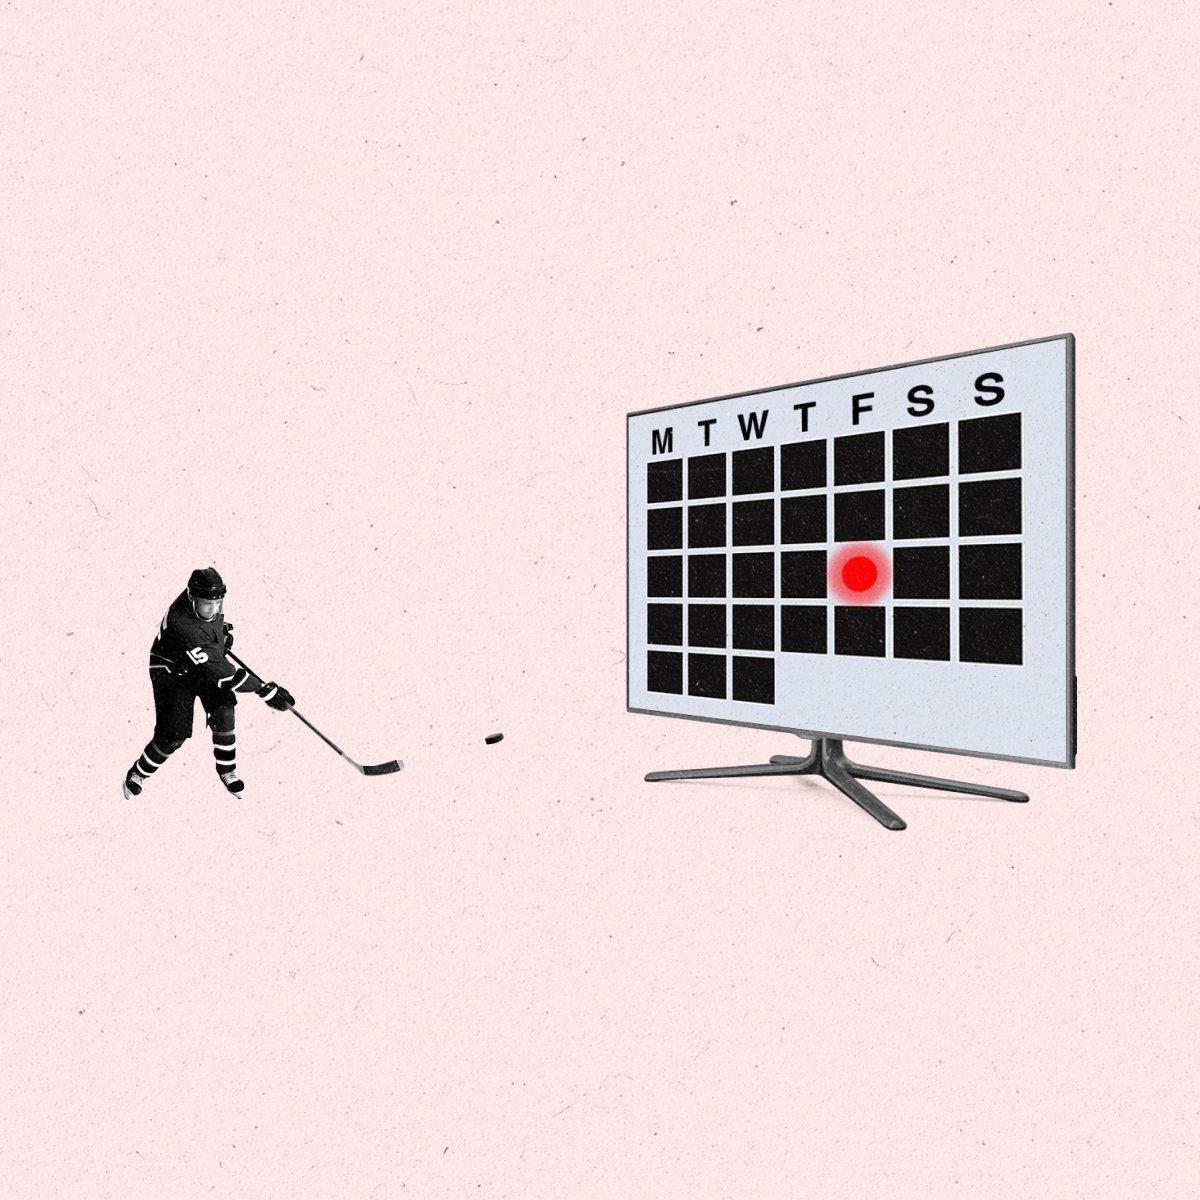 An ice hockey player hits a puck into a TV with a calendar on it.